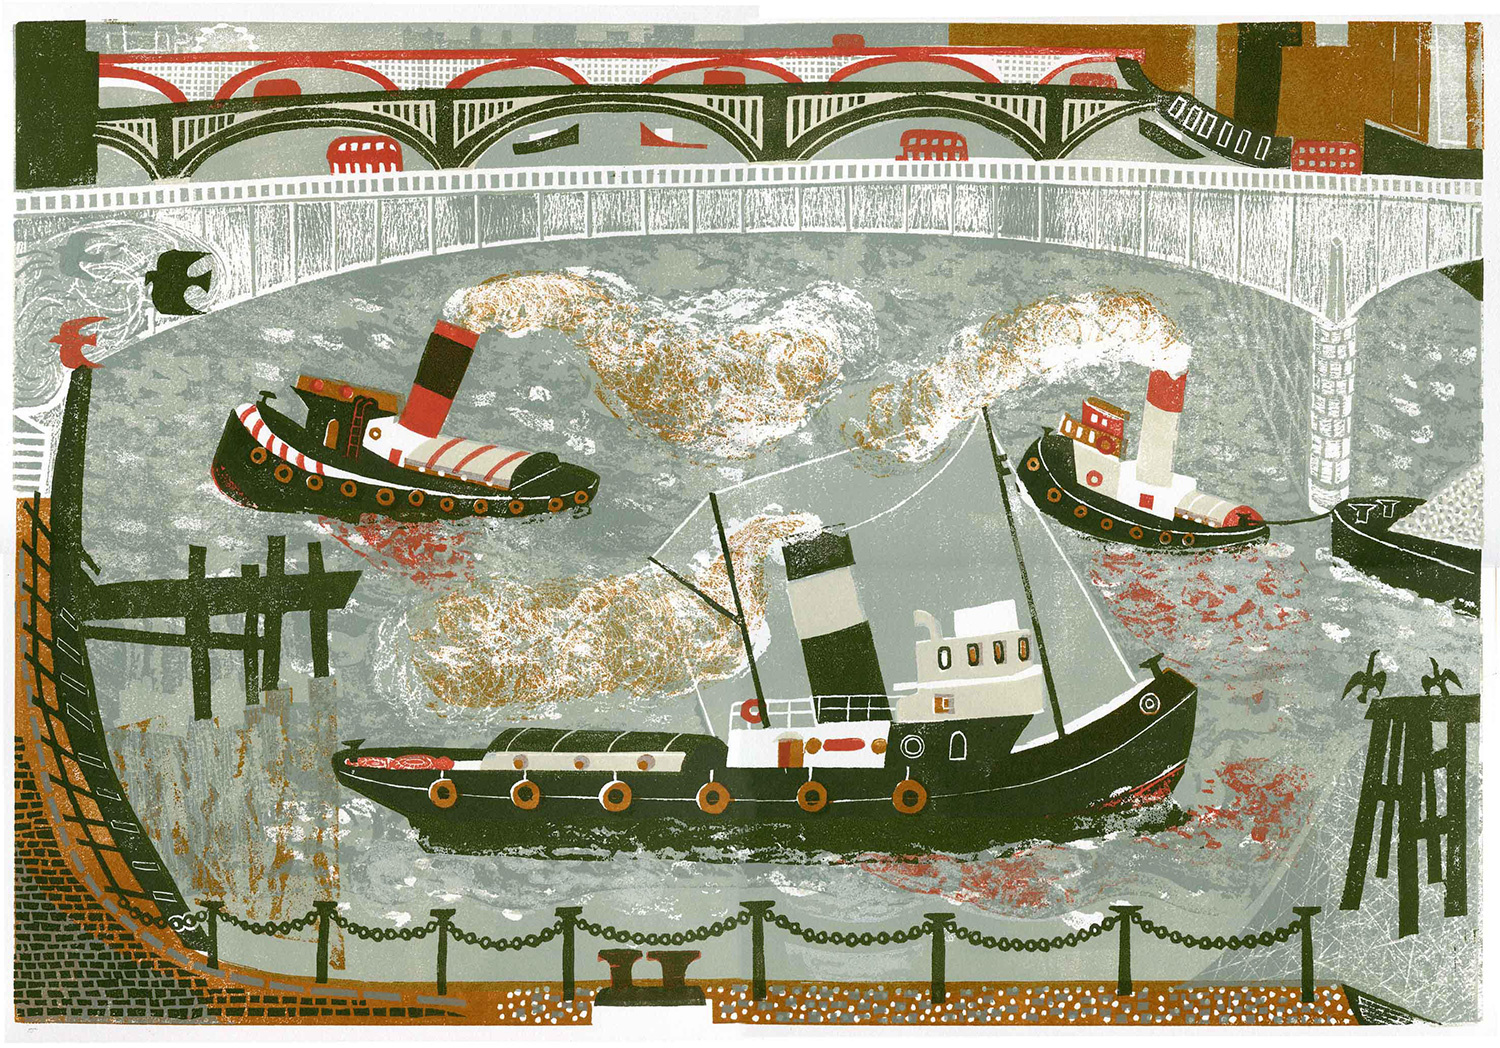 Tugboats on the Thames by Melvyn Evans